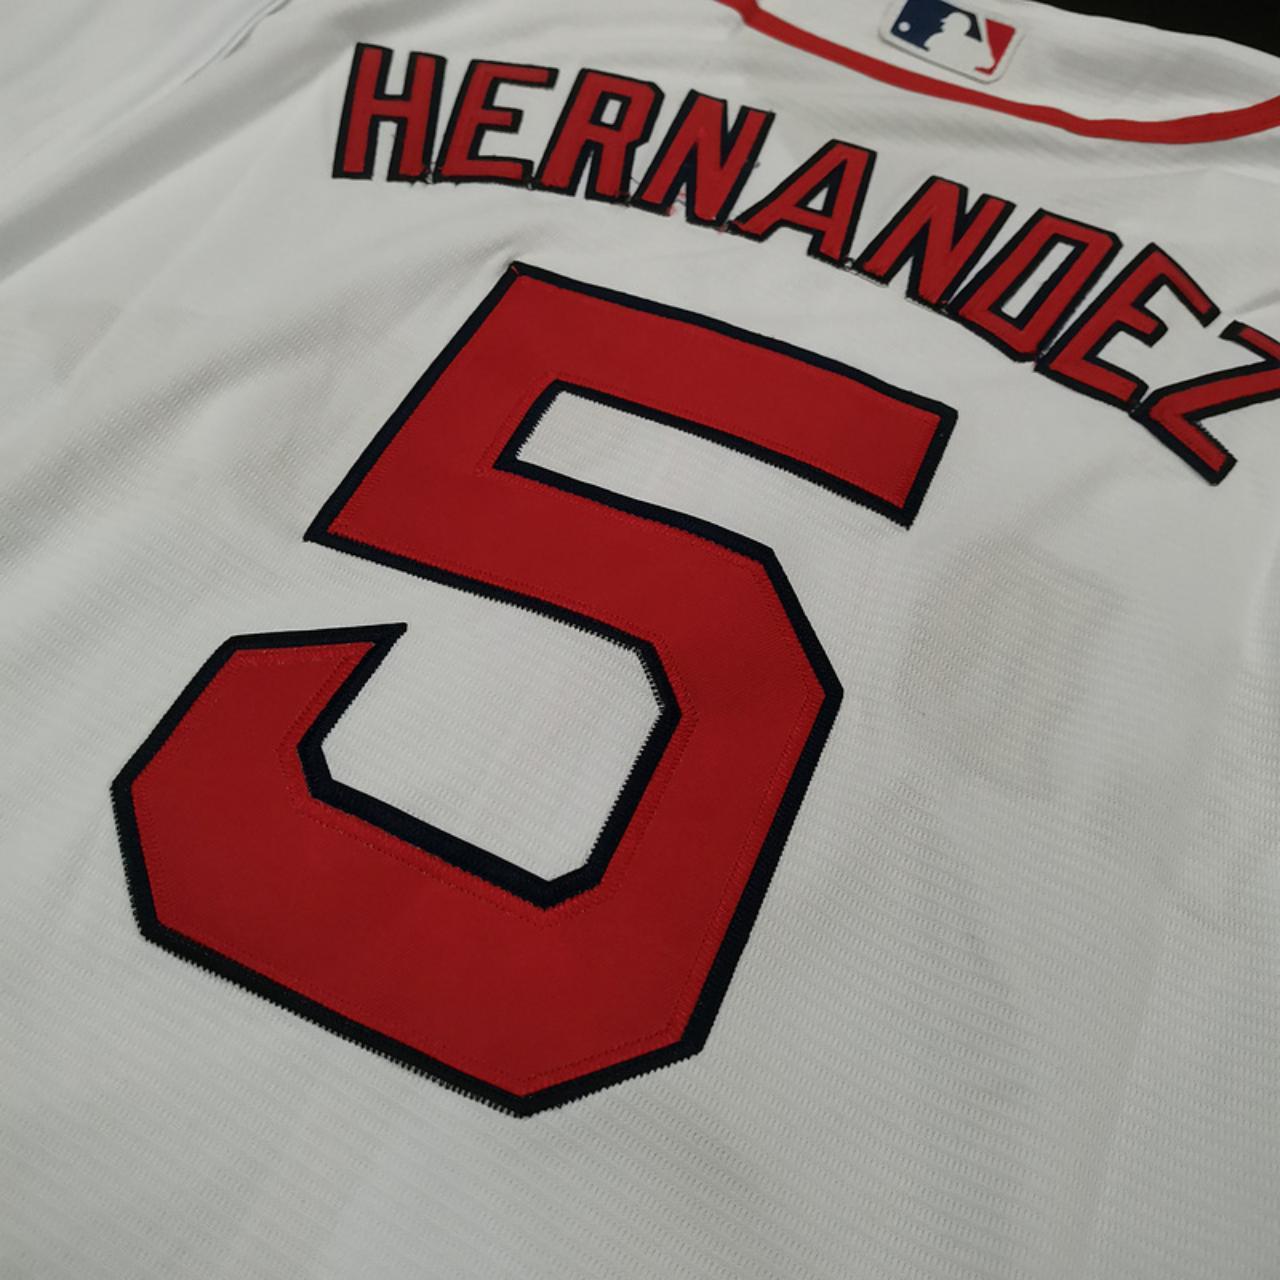 Enrique Hernandez #5 Boston Red Sox at Minnesota Twins August 31, 2022 Game  Used Road Jersey, Size 42, 1 for 5